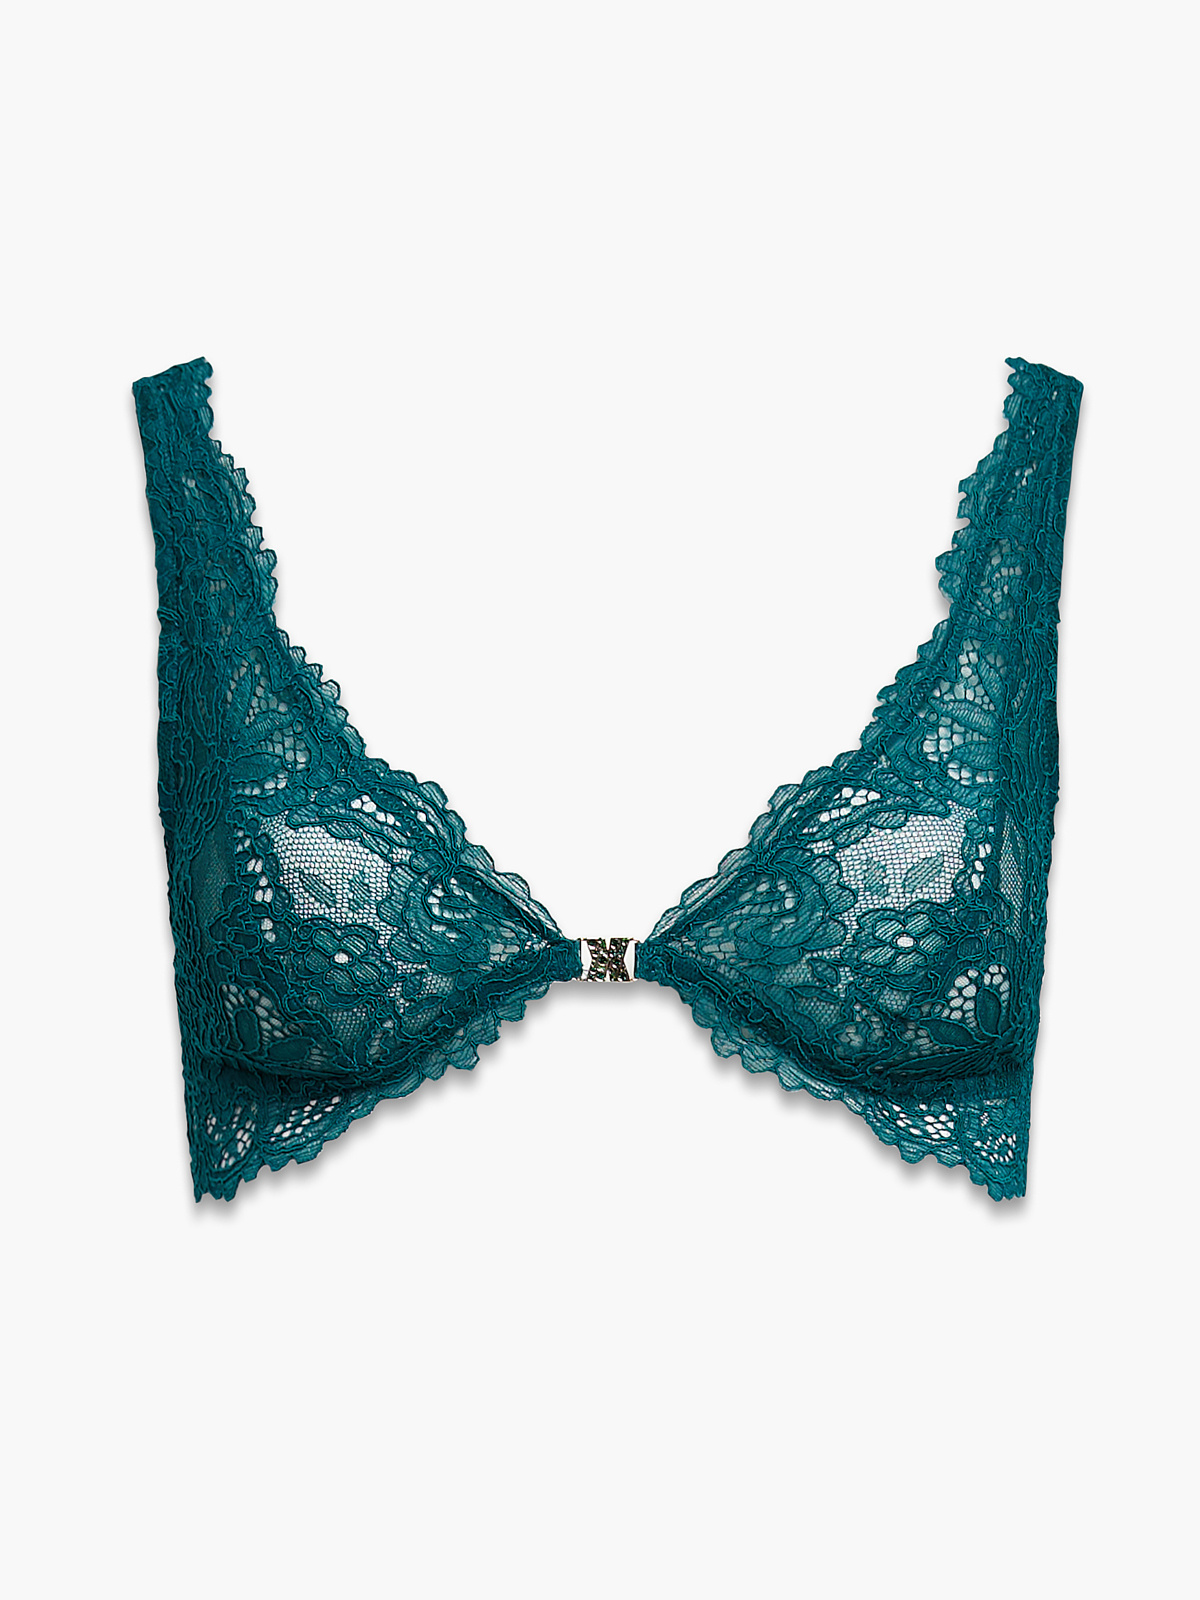 Romantic Corded Lace Front-Closure Bralette in Green | SAVAGE X FENTY ...